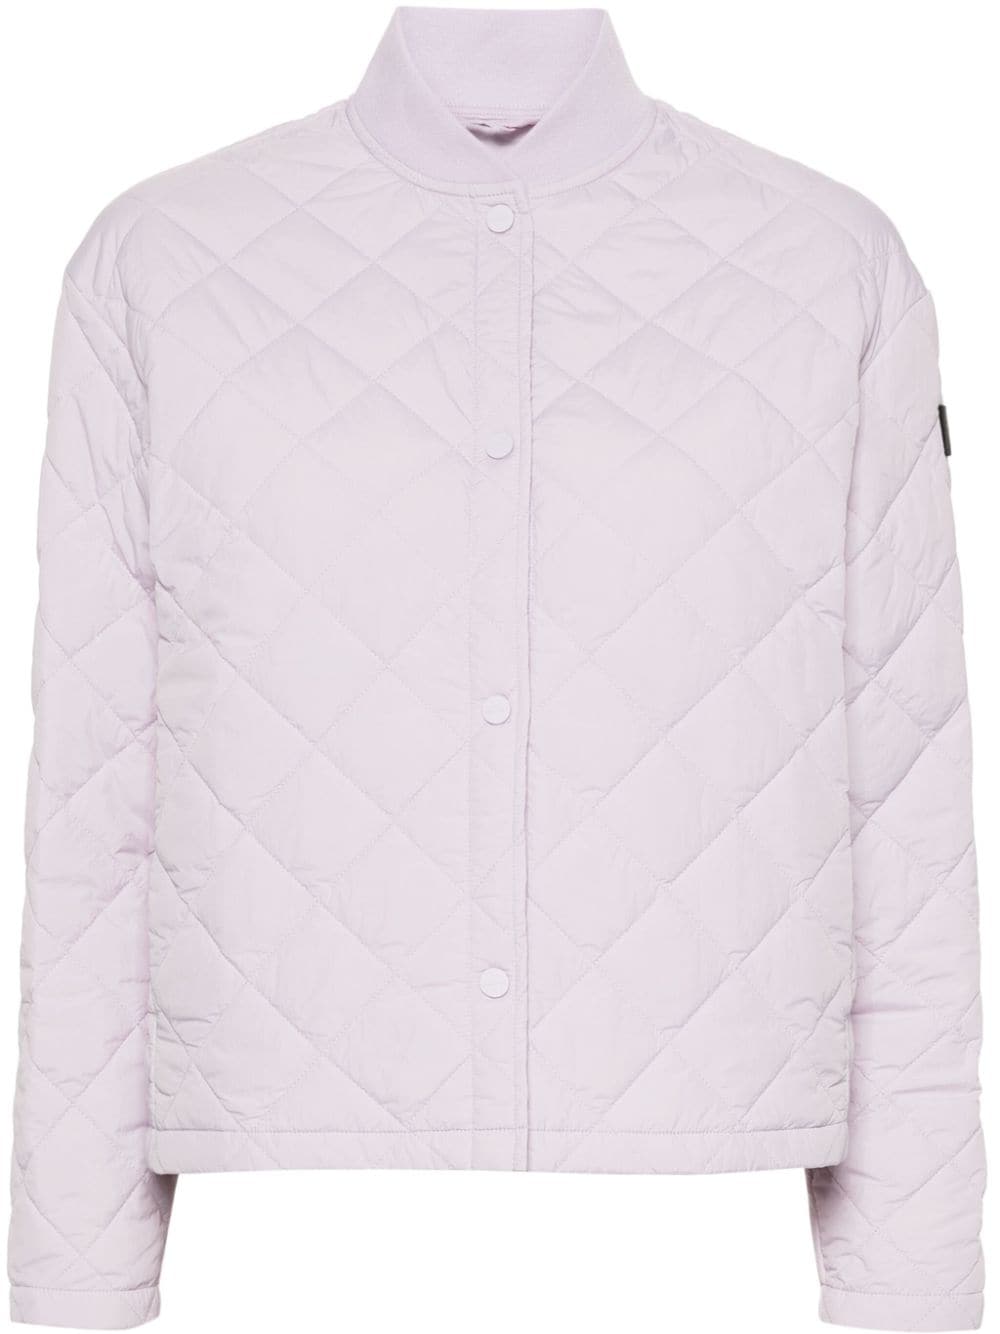 Yllas diamond-quilted jacket